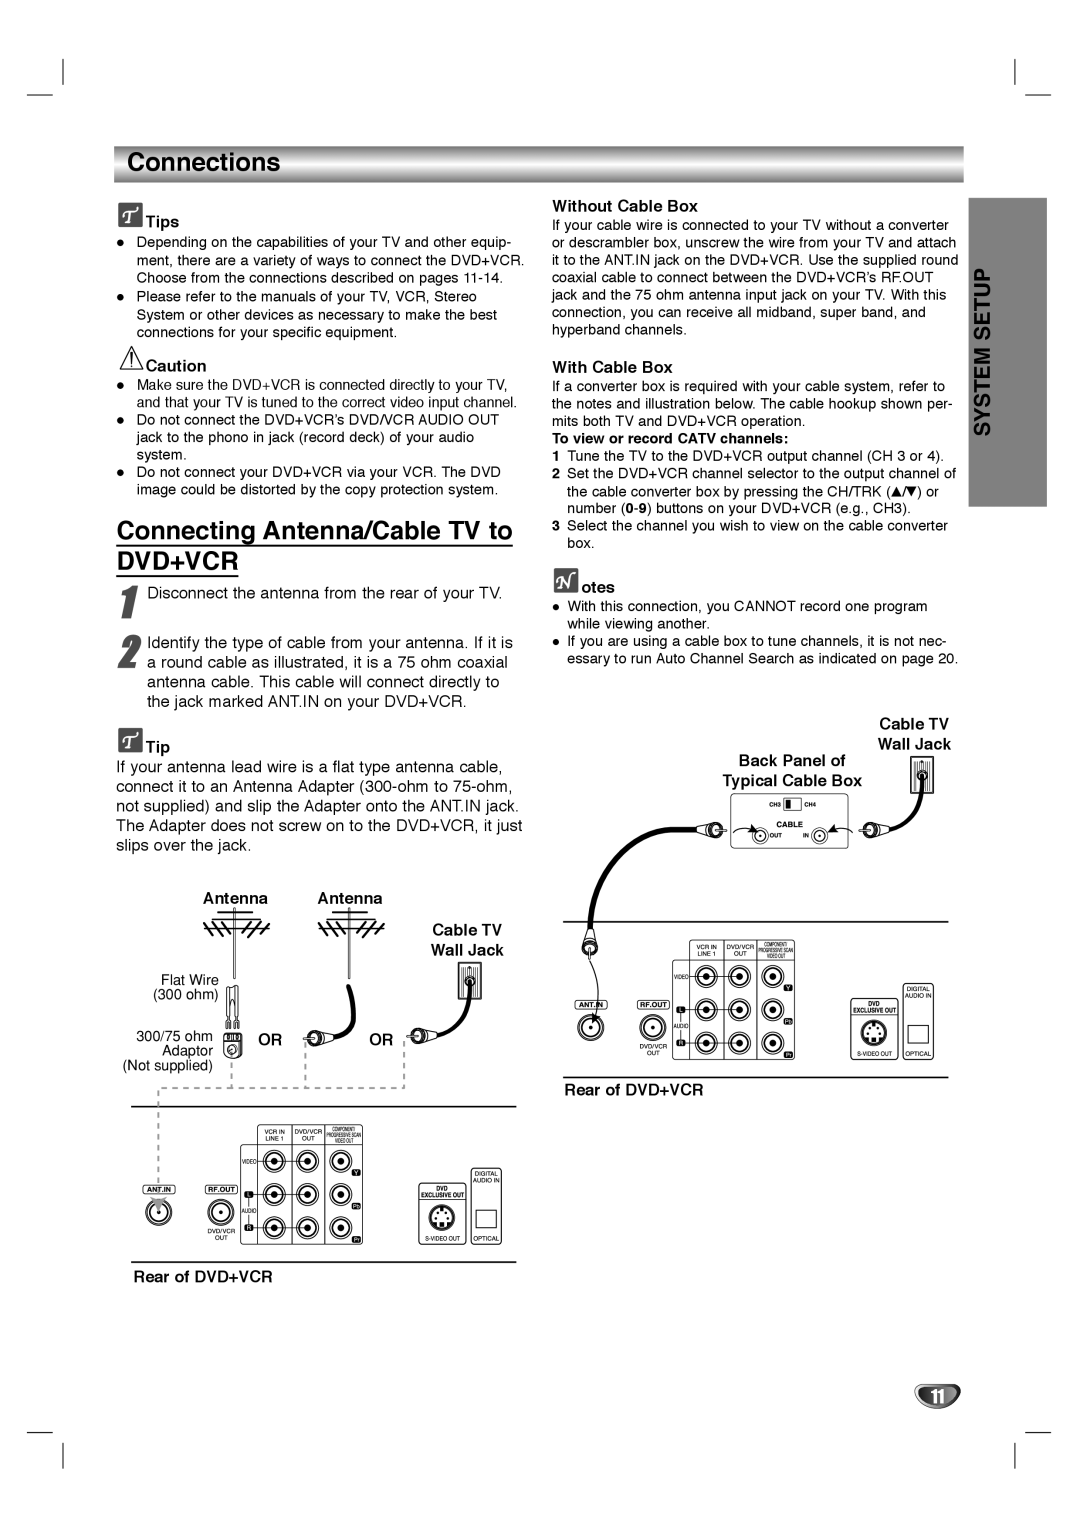 Dolby Laboratories HT2030 manual Connections, Connecting Antenna/Cable TV to DVD+VCR, System Setup 